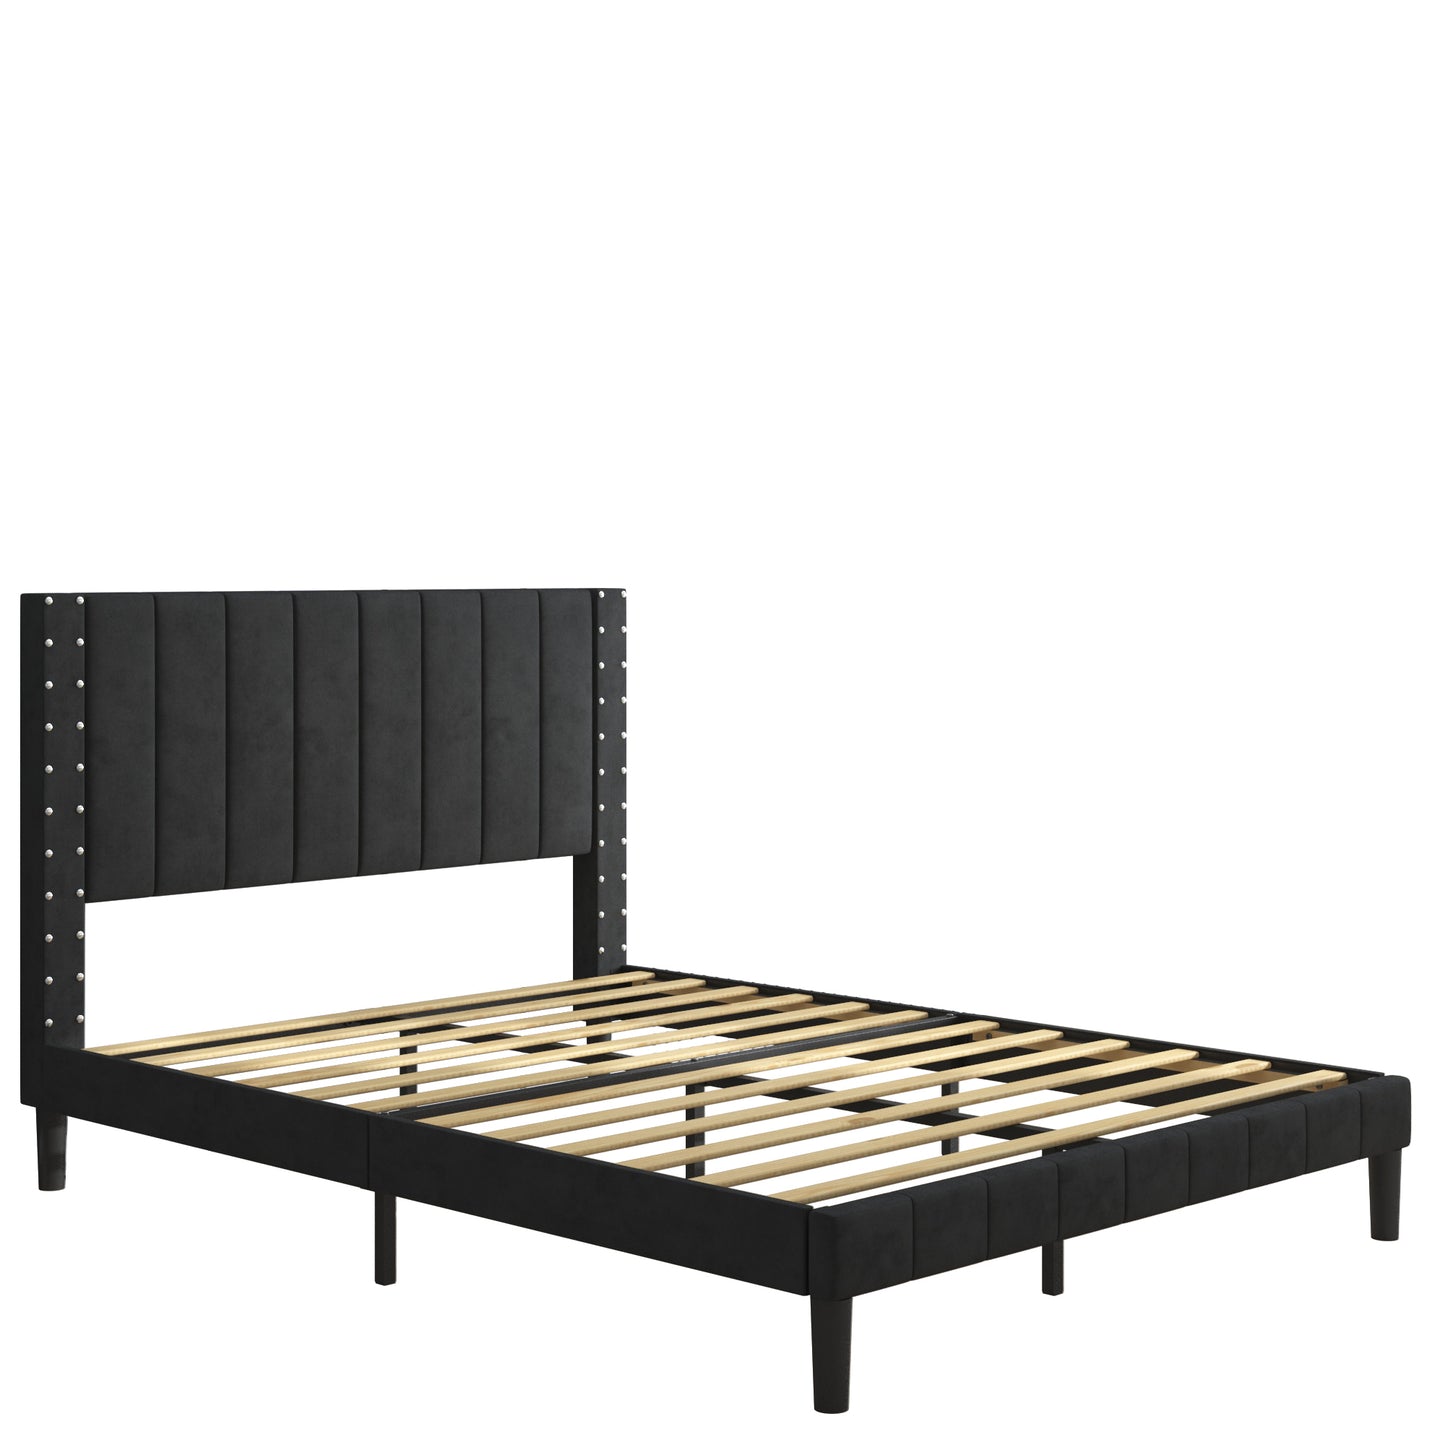 Vertical stripe Upholstered Headboard Platform Bed Frame，With wood Slat Support, Easy Assembly, Twin/Full/Queen  Black